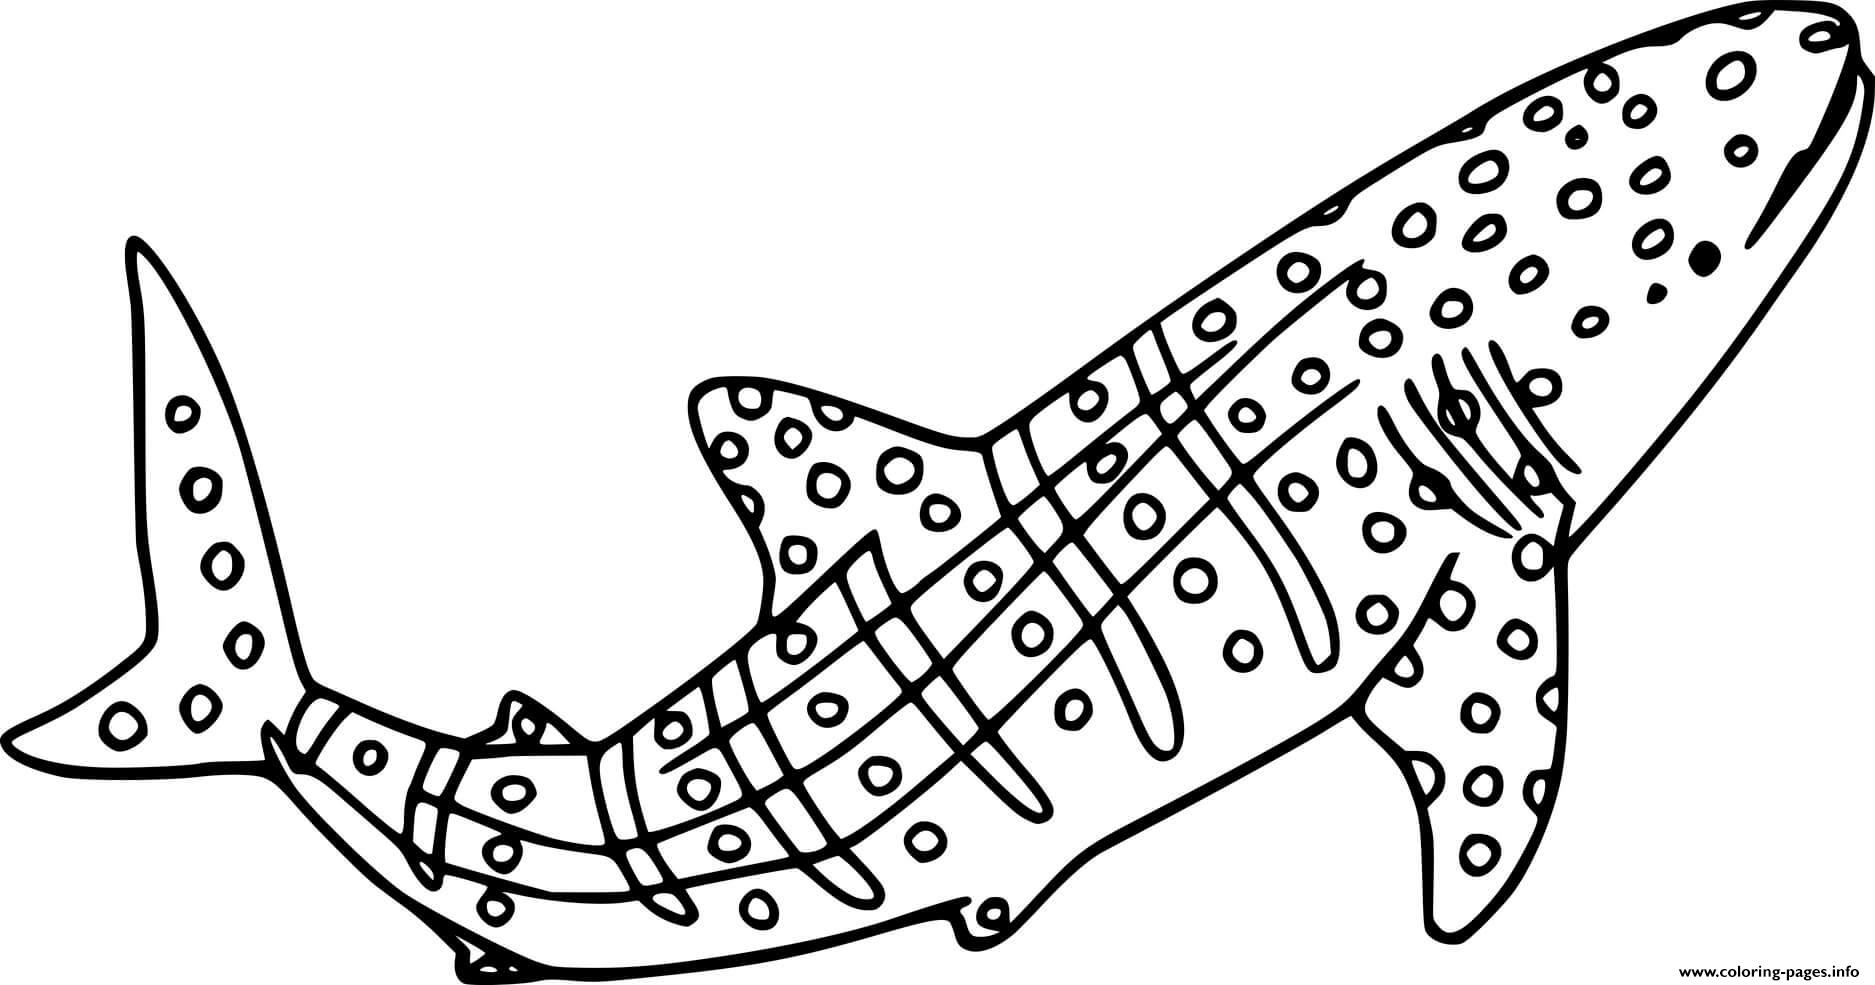 Jumping whale shark coloring page printable